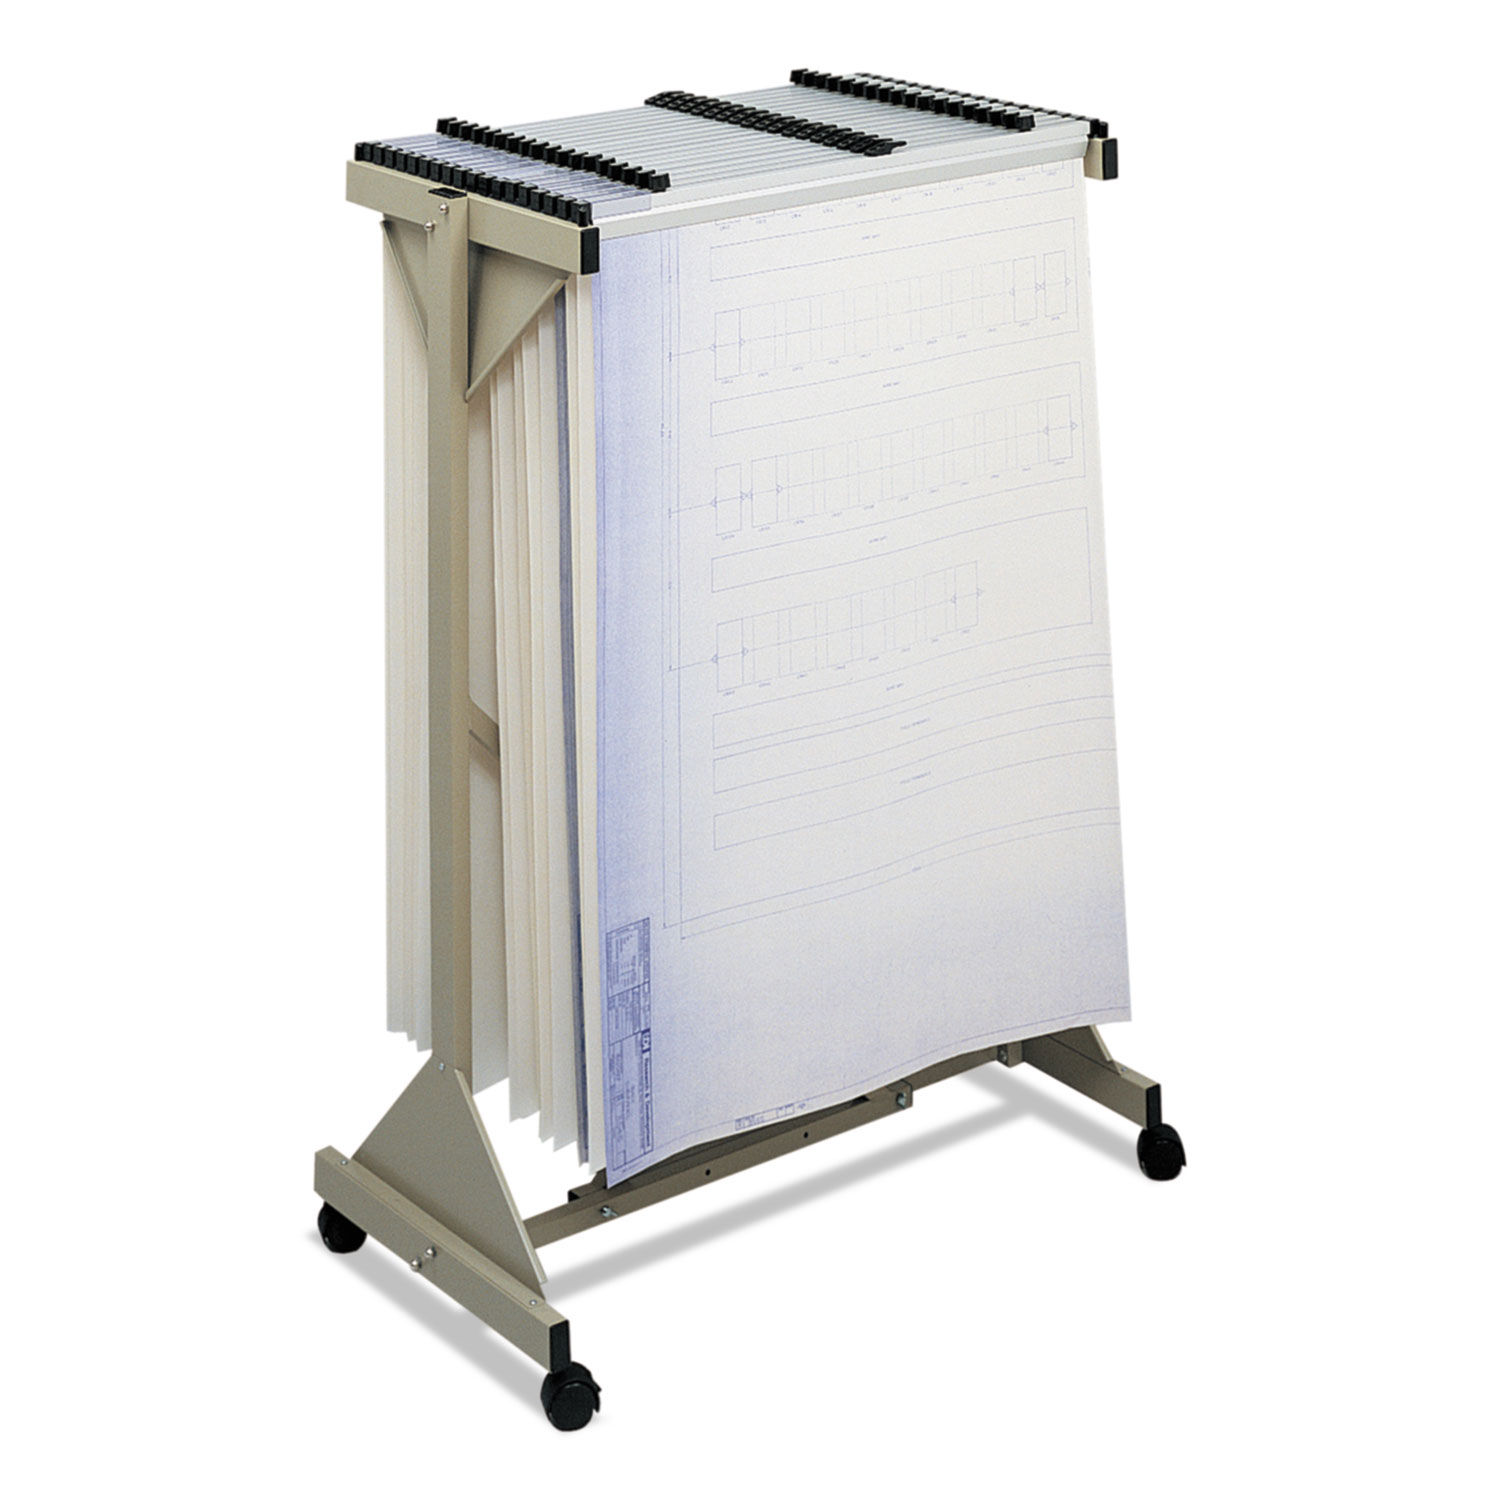 Mobile Plan Center Sheet Rack 18 Hanging Clamps, 43.75w x 20.5d x 51h, Sand